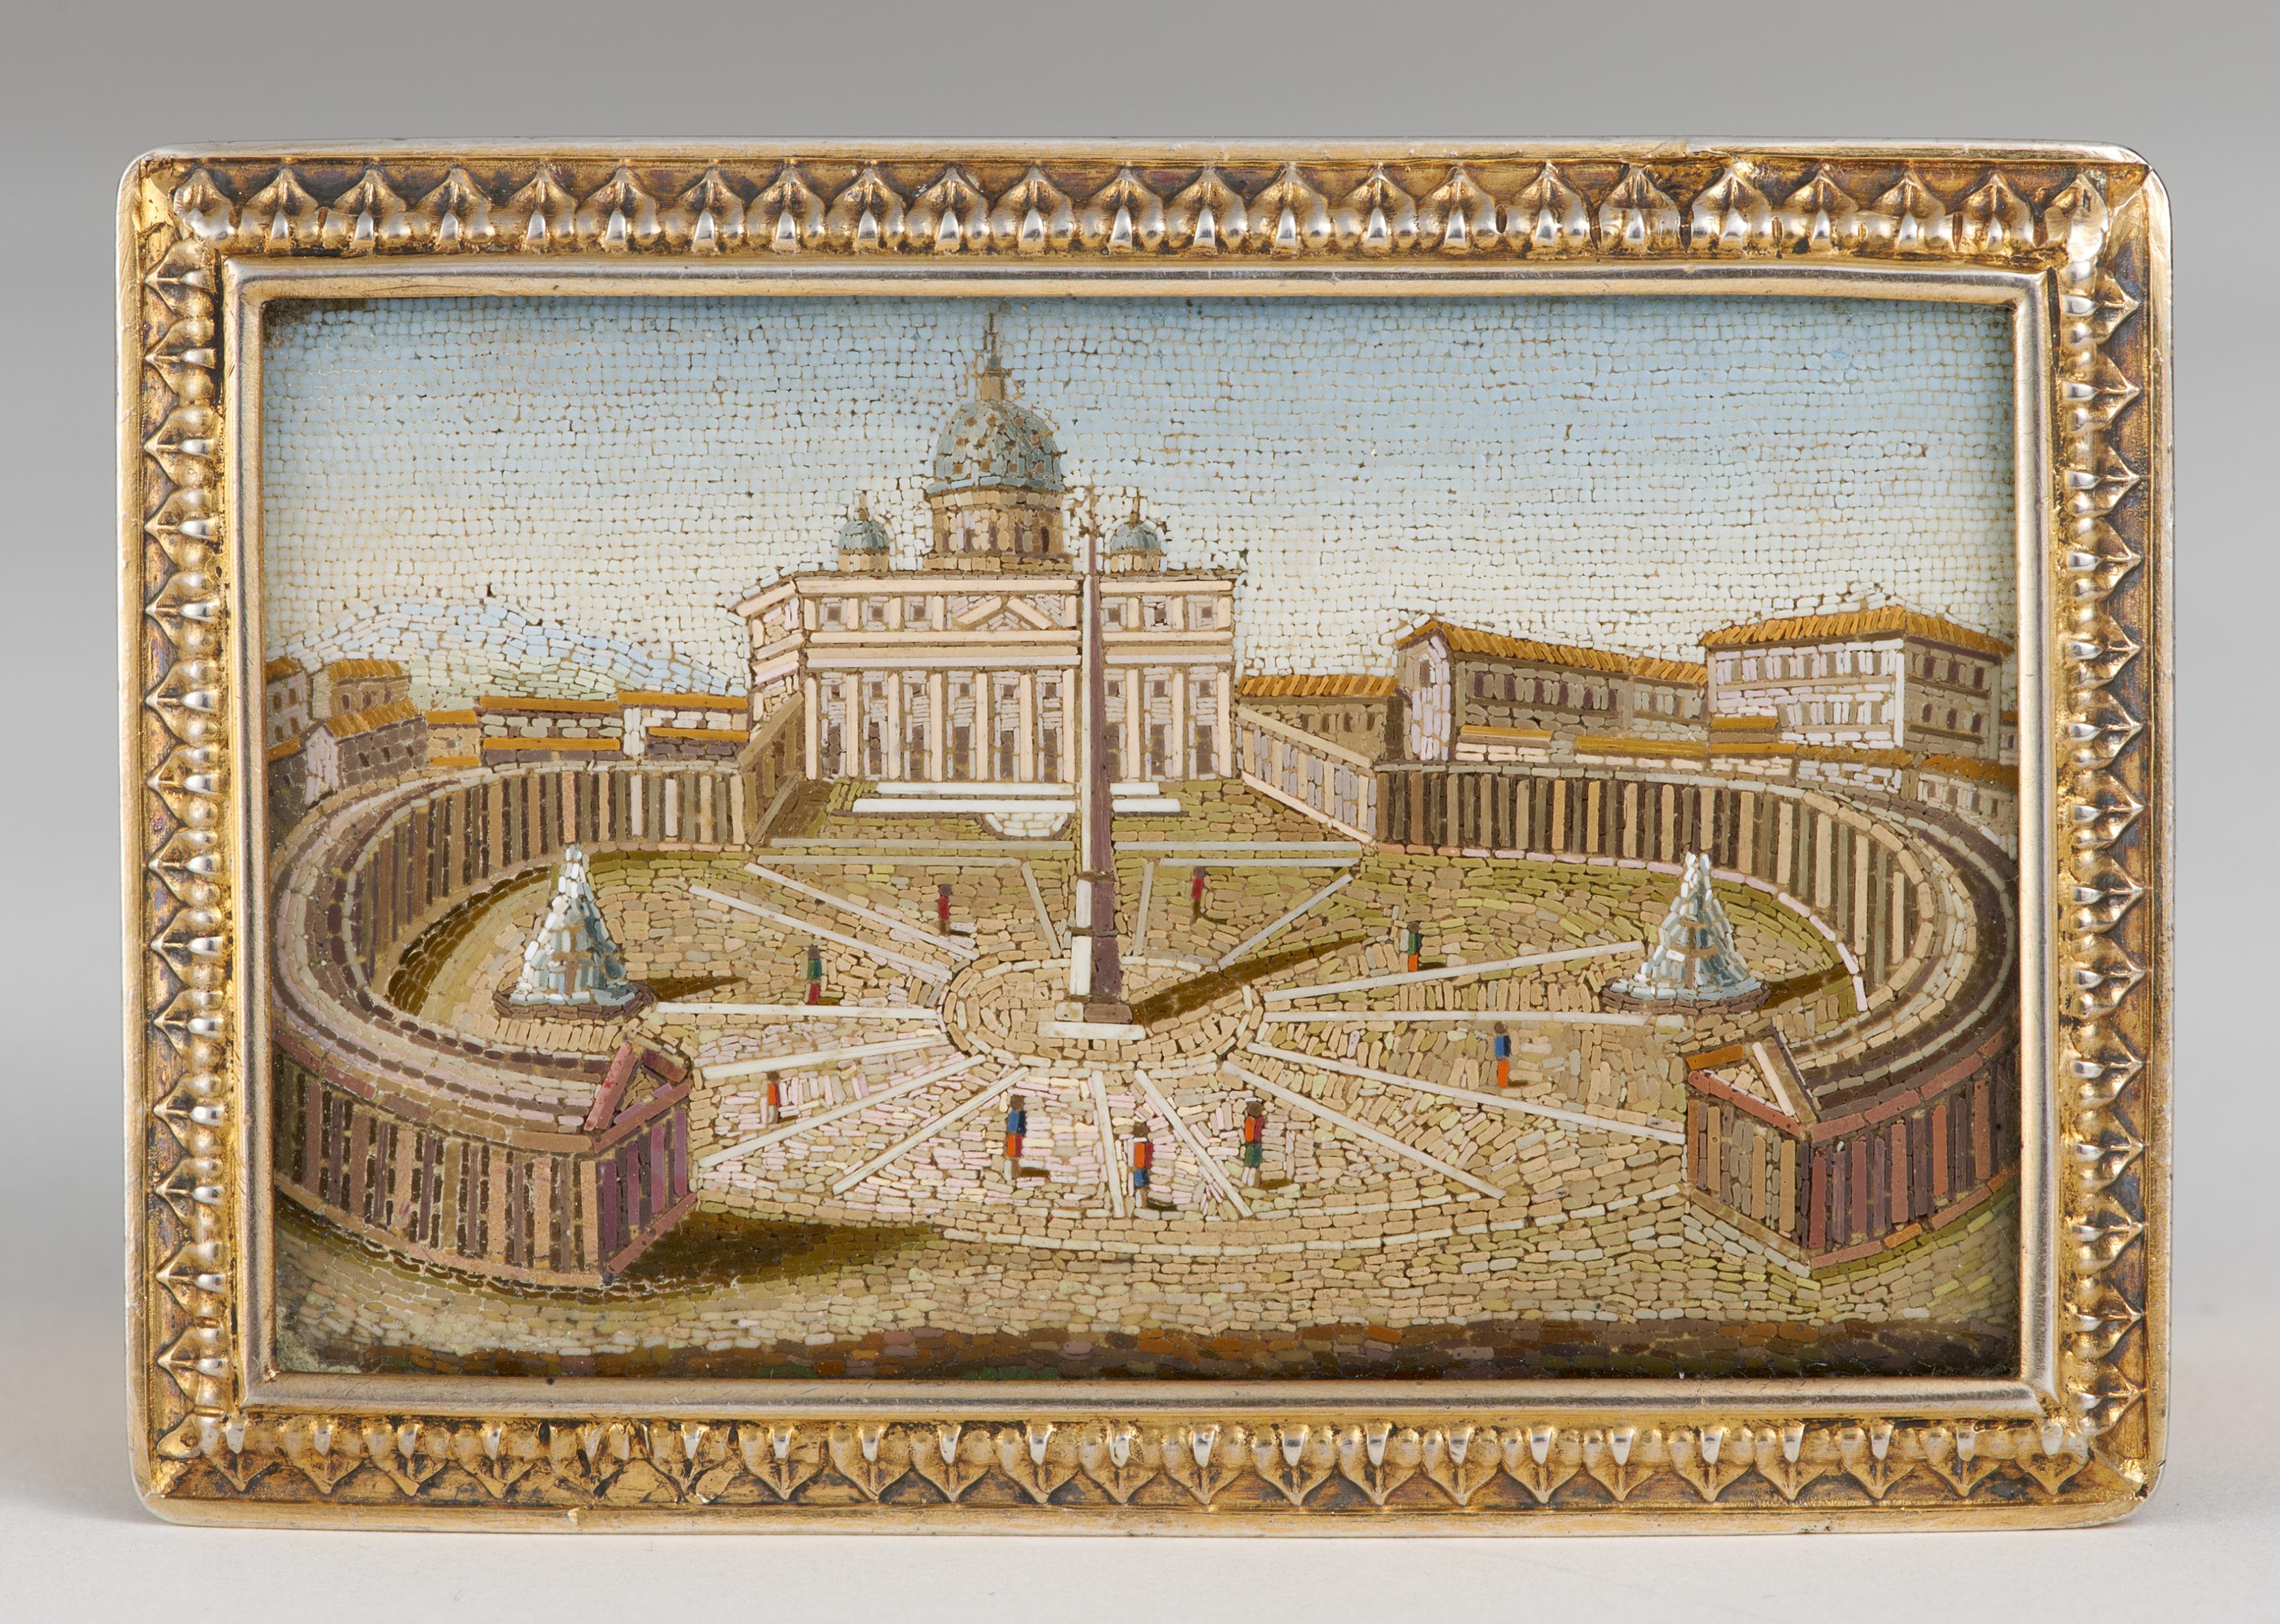 Two exquisite gilt silver and glass snuffboxes with cityscapes of rome in micro mosaic - Image 11 of 14